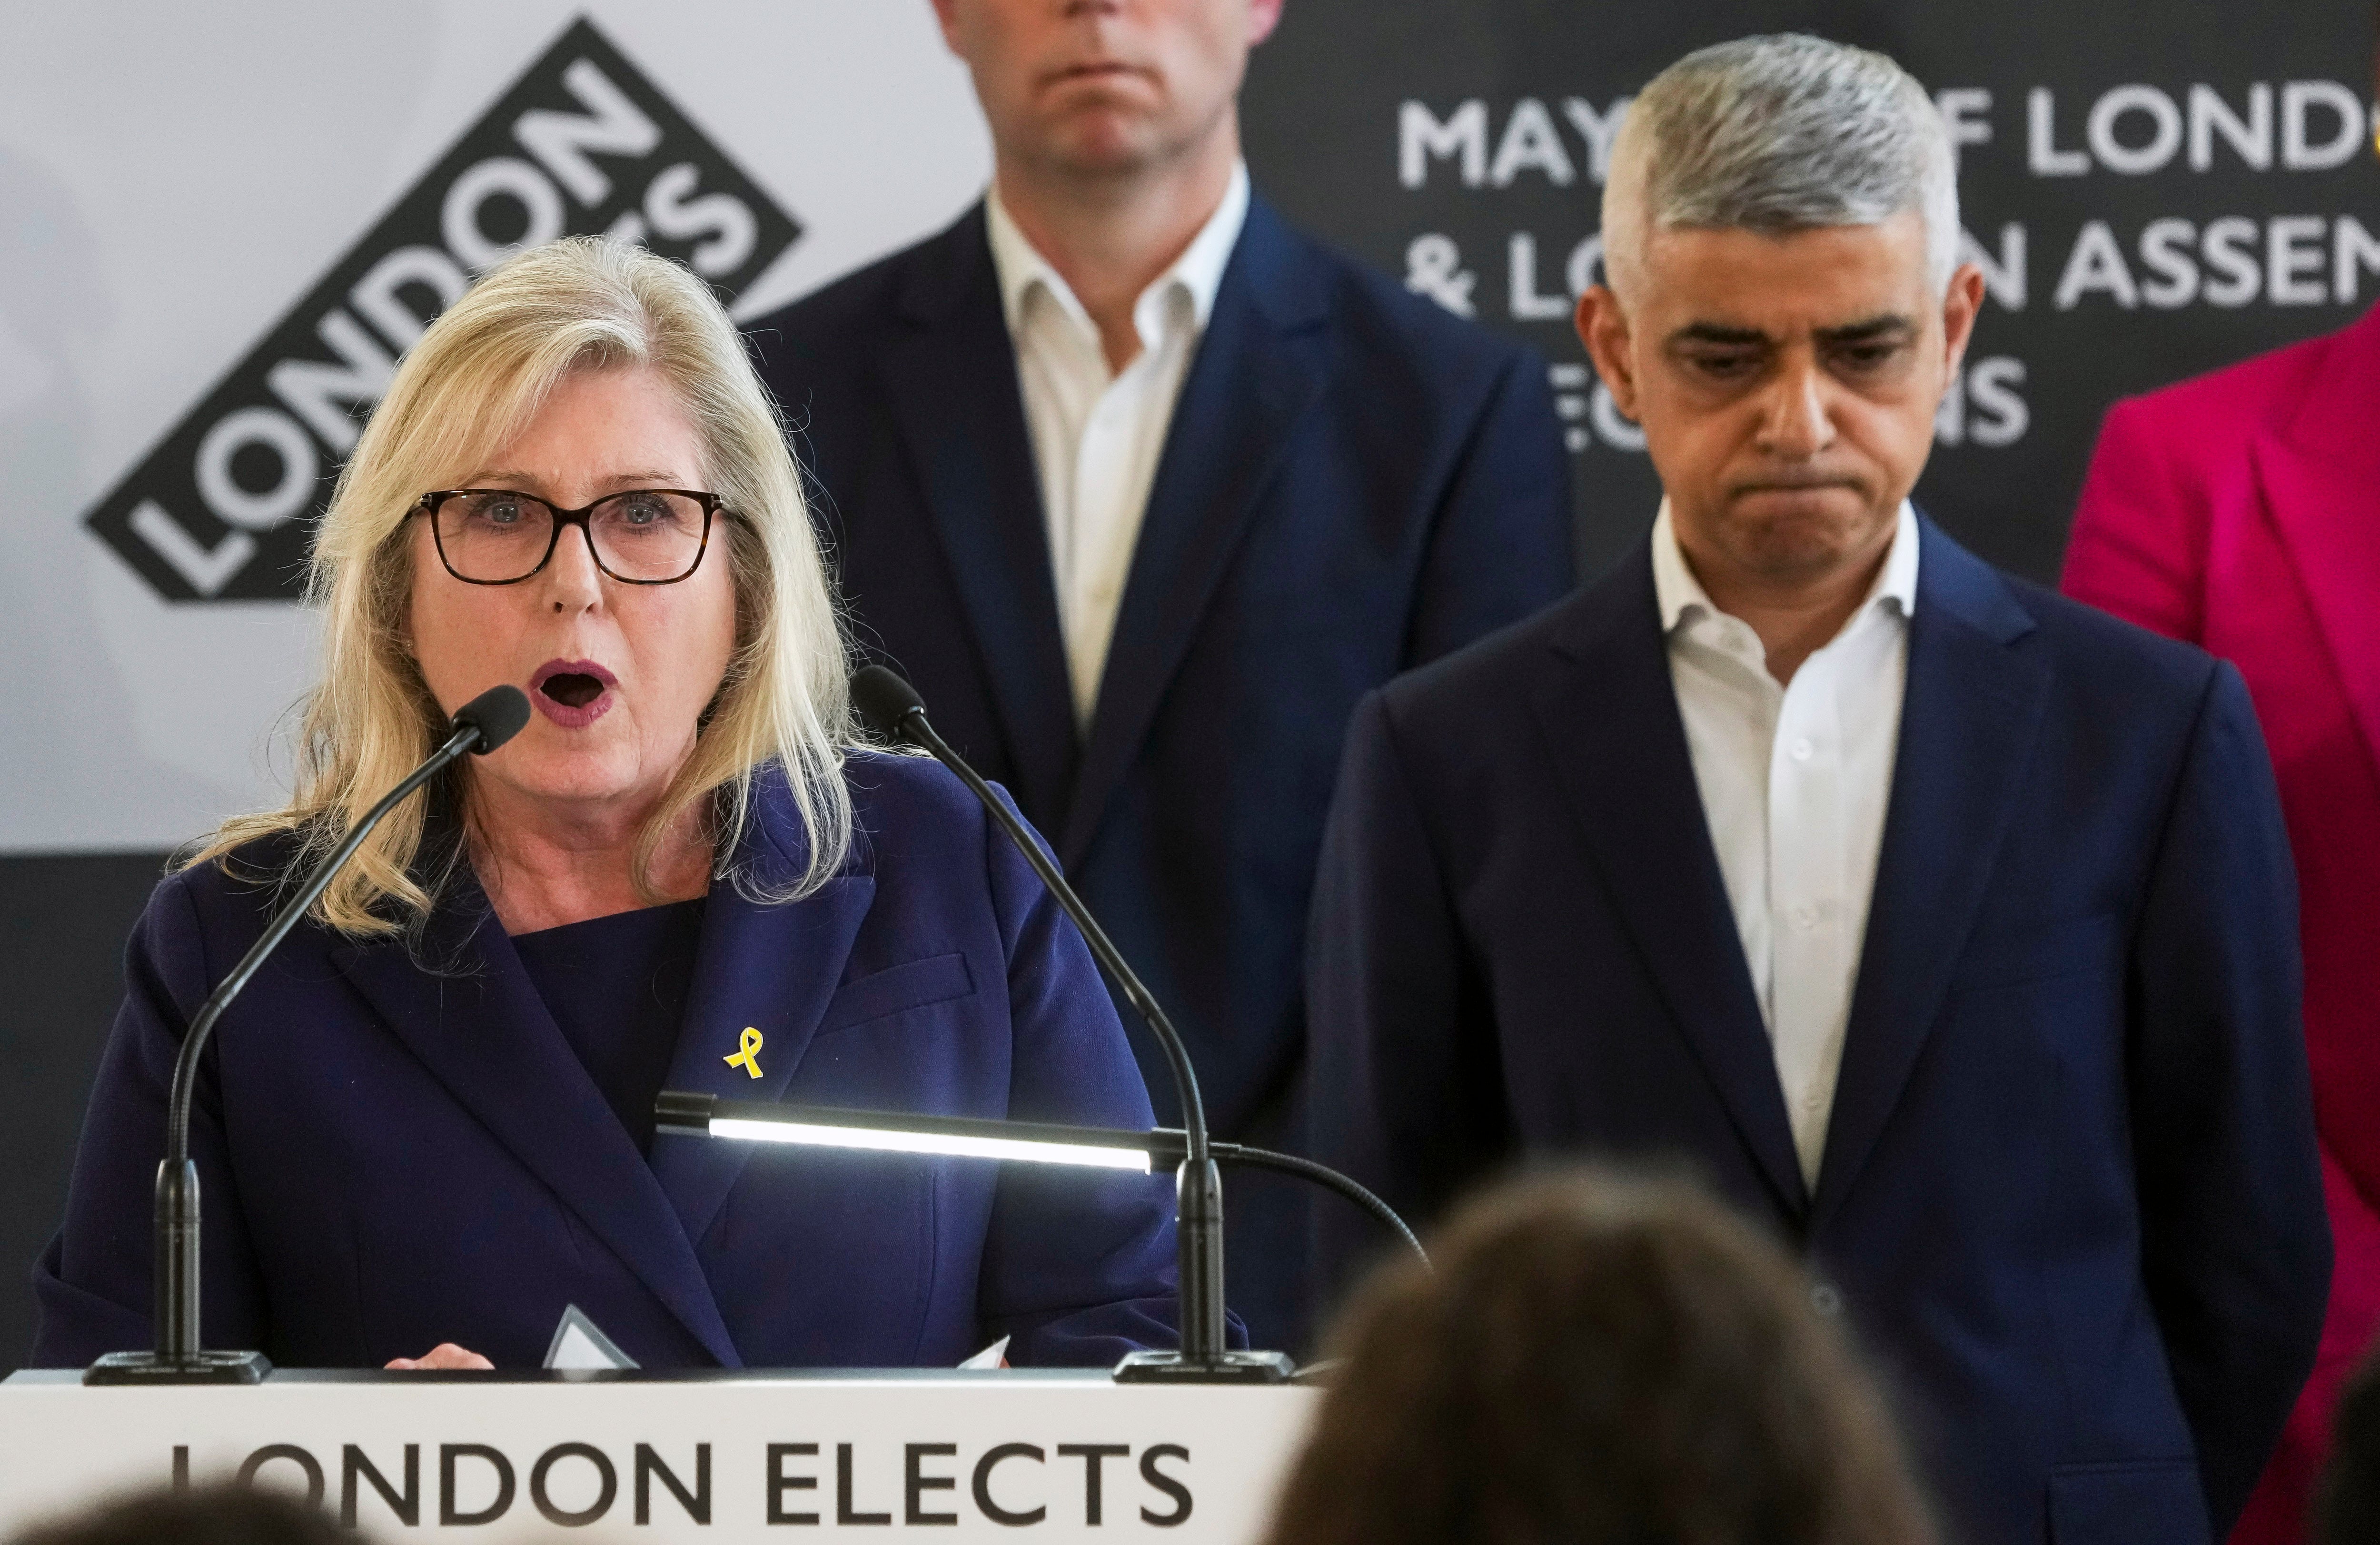 The Conservatives’ Susan Hall gives her speech at City Hall after losing the London mayoral election